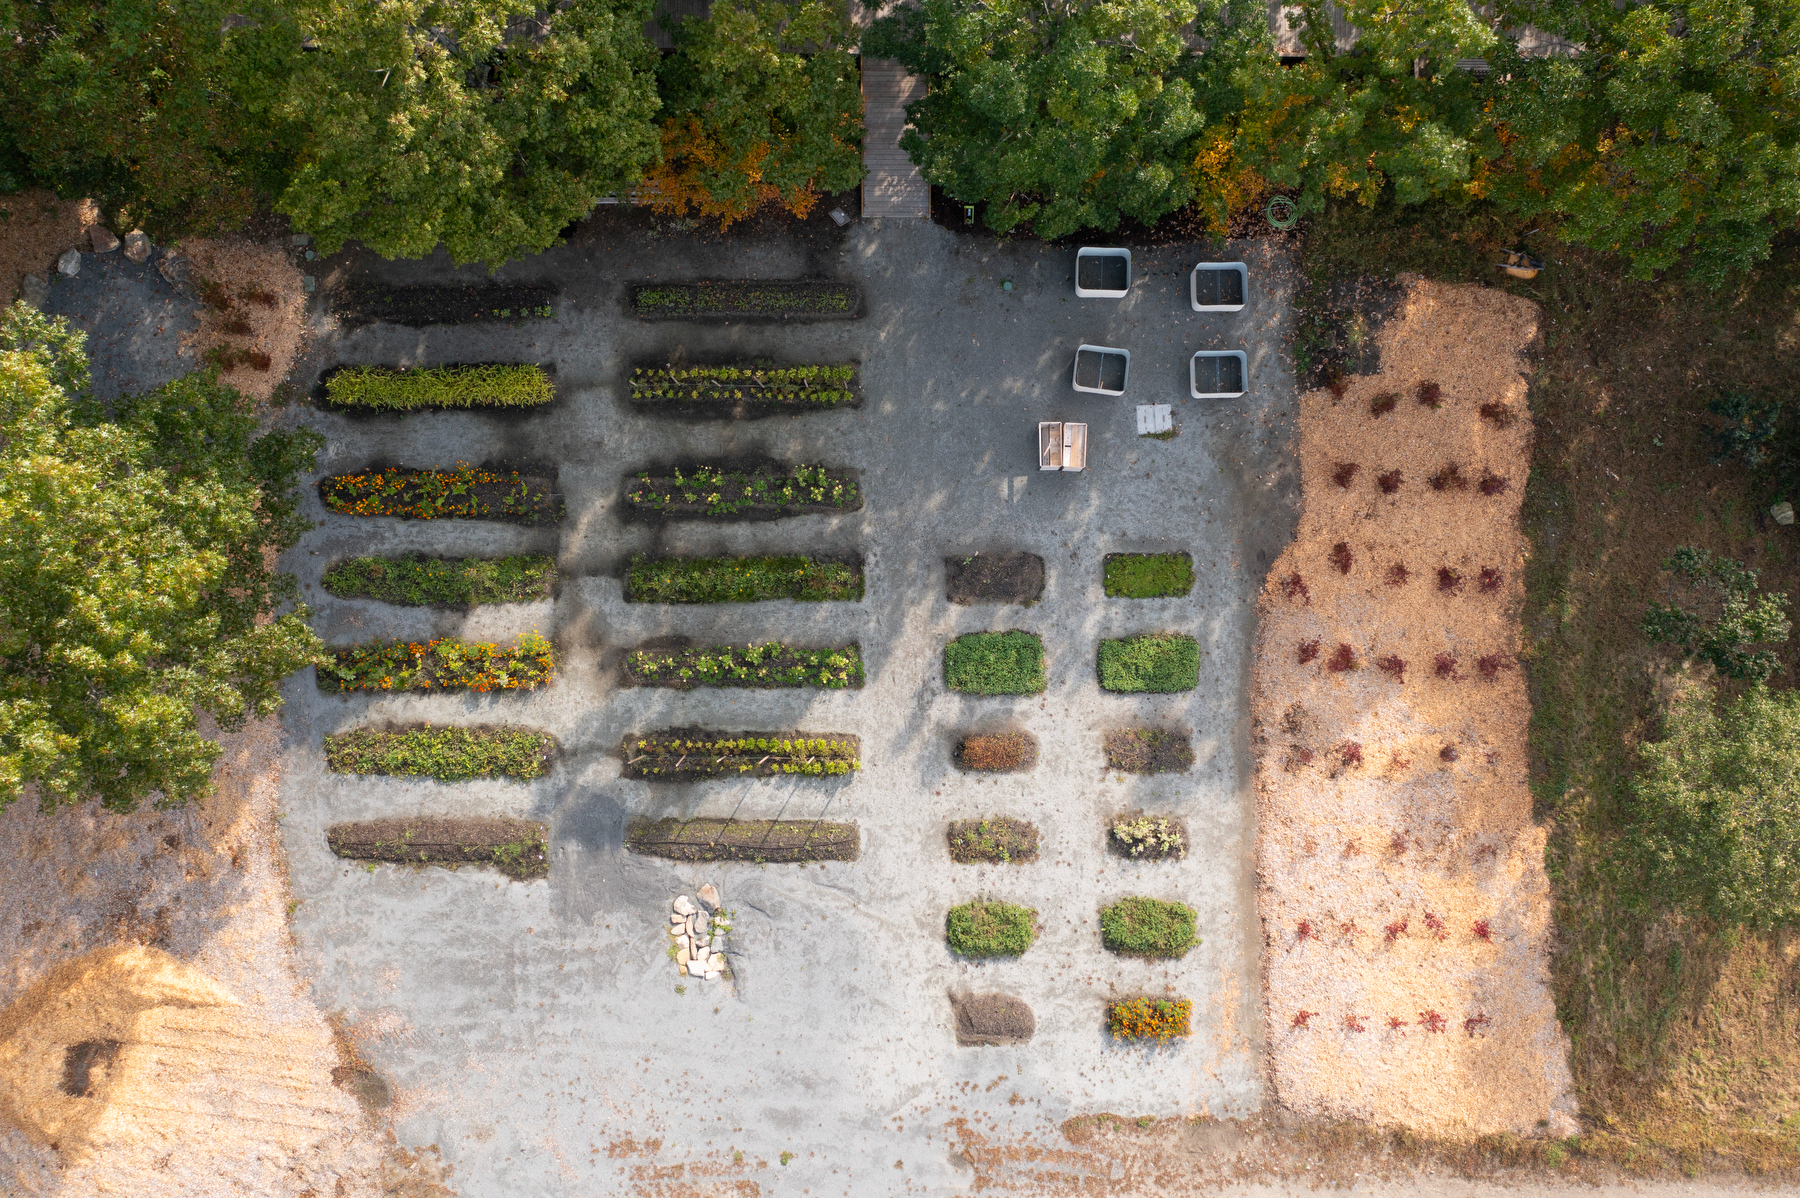 An aerial view of the Climate Garden in early autumn